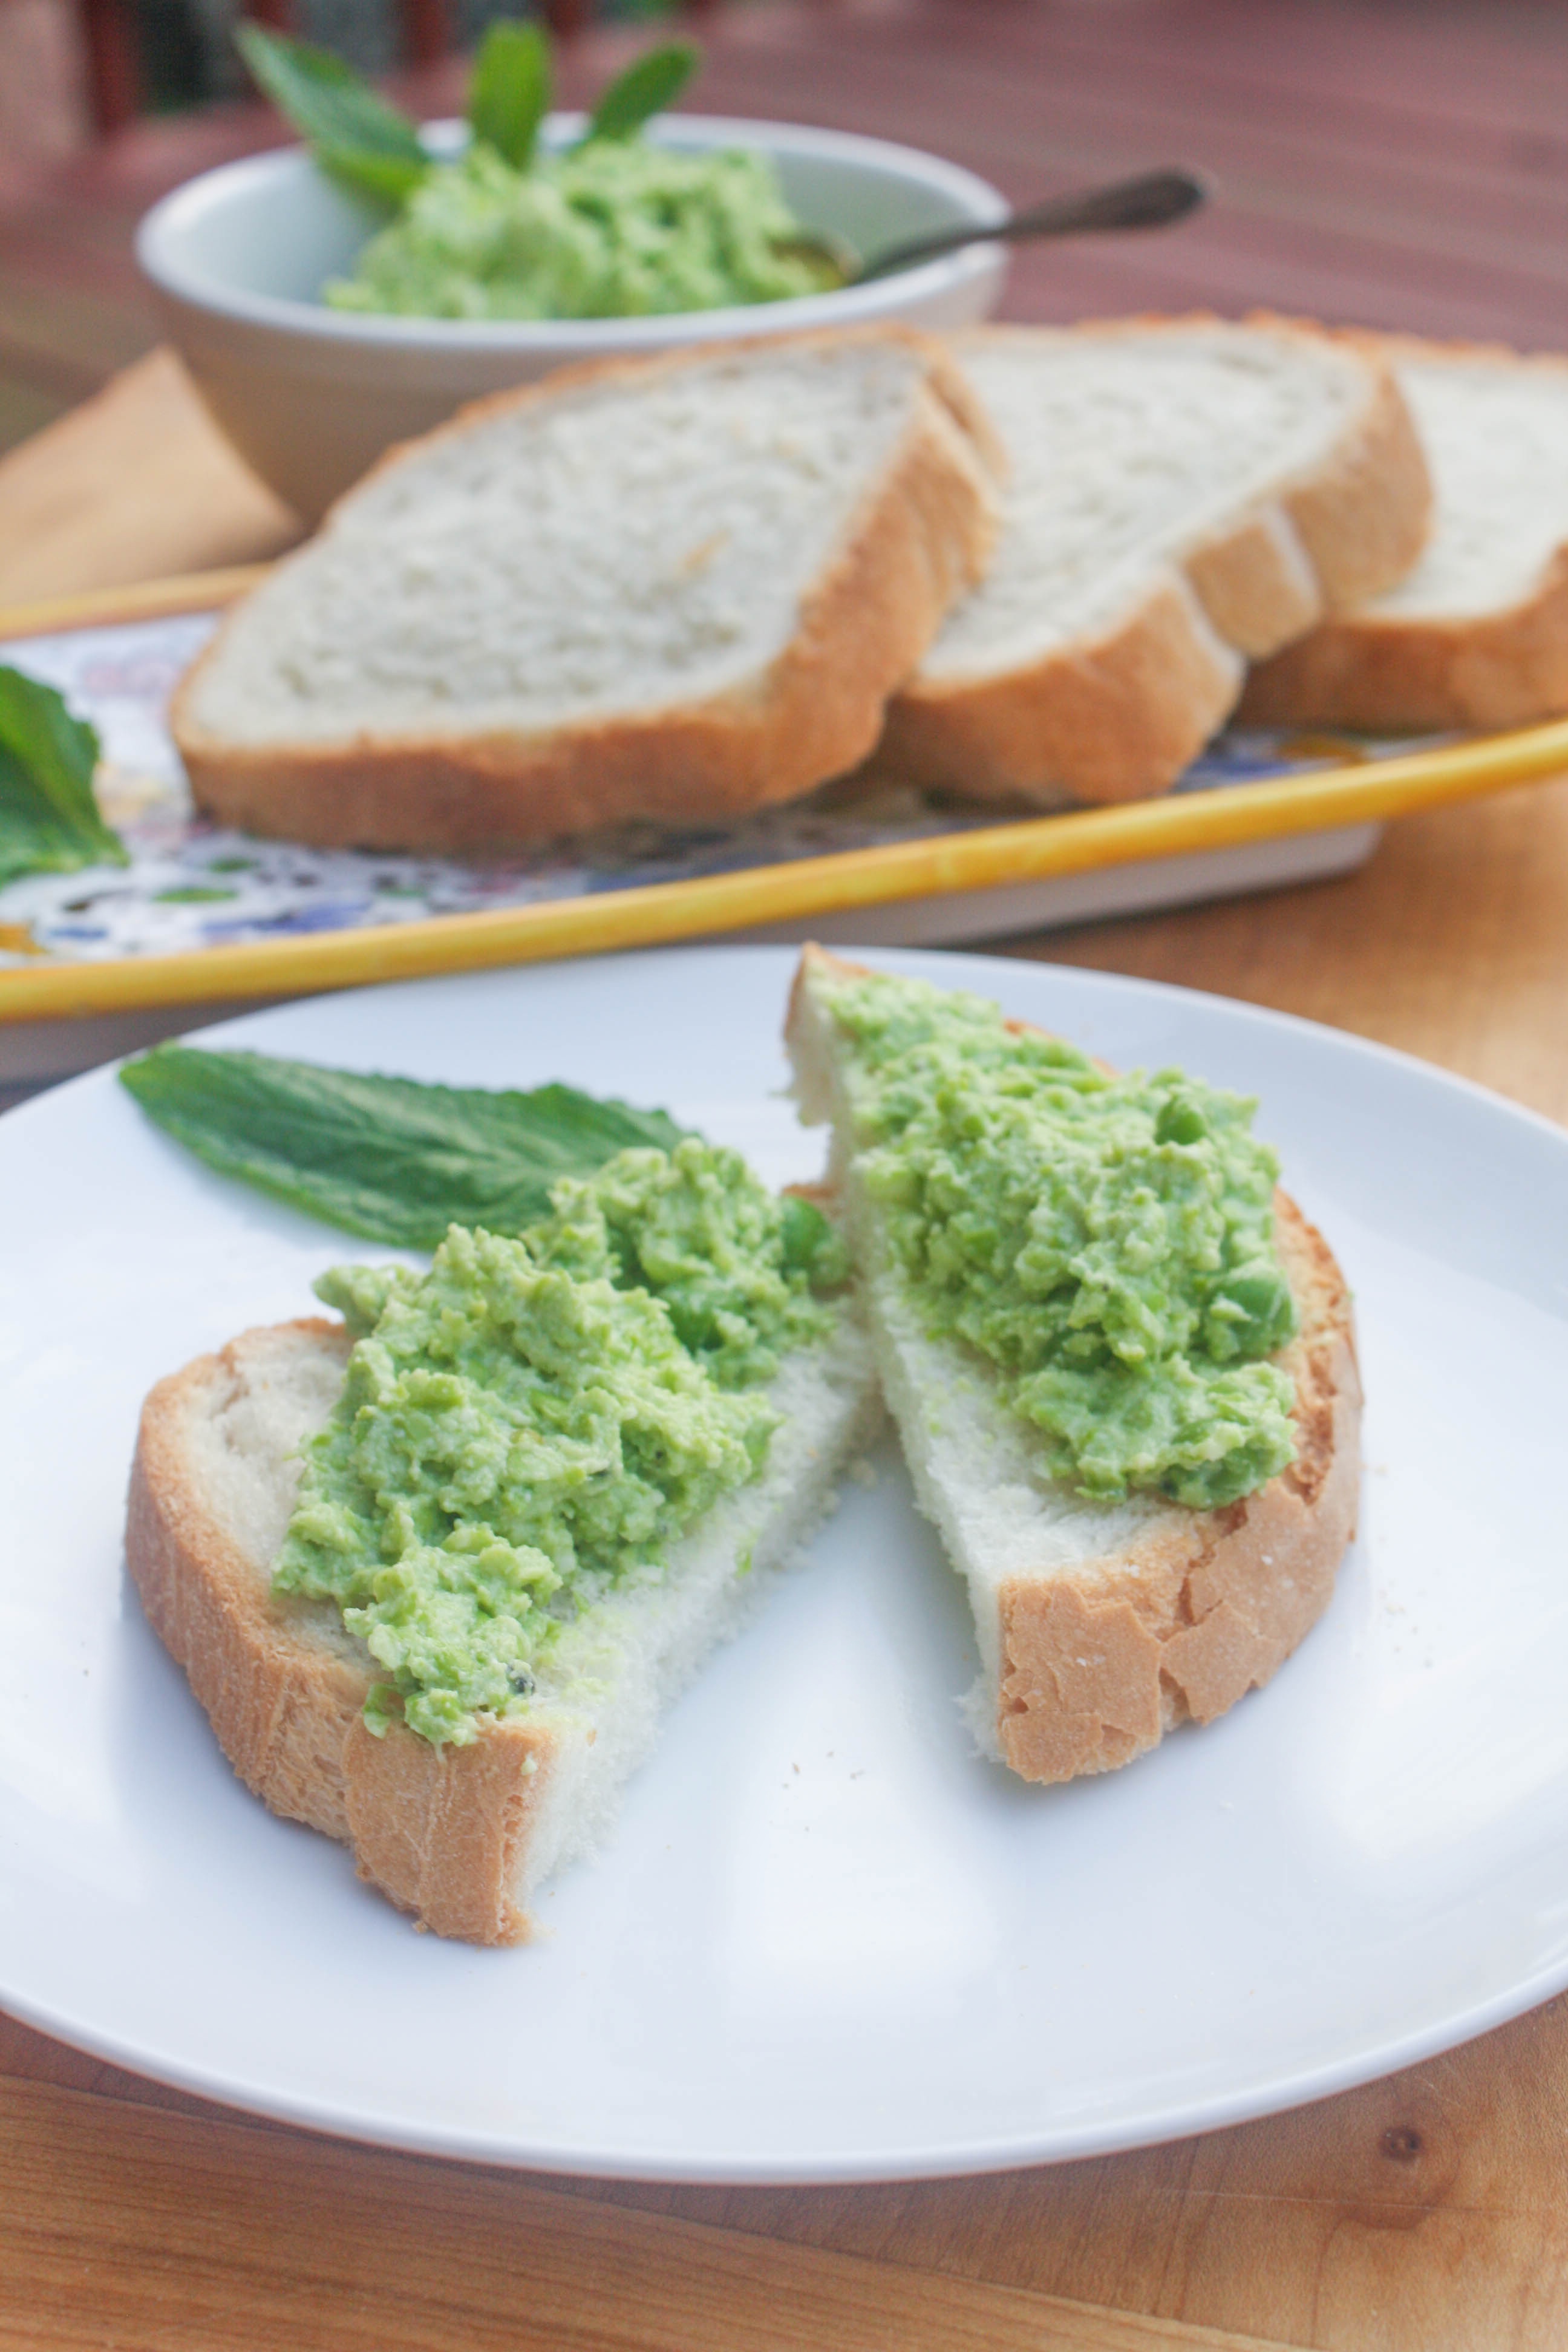 Pea and Ricotta Spread is a tasty appetizer for the season. Try a batch of Pea and Ricotta Spread this season!